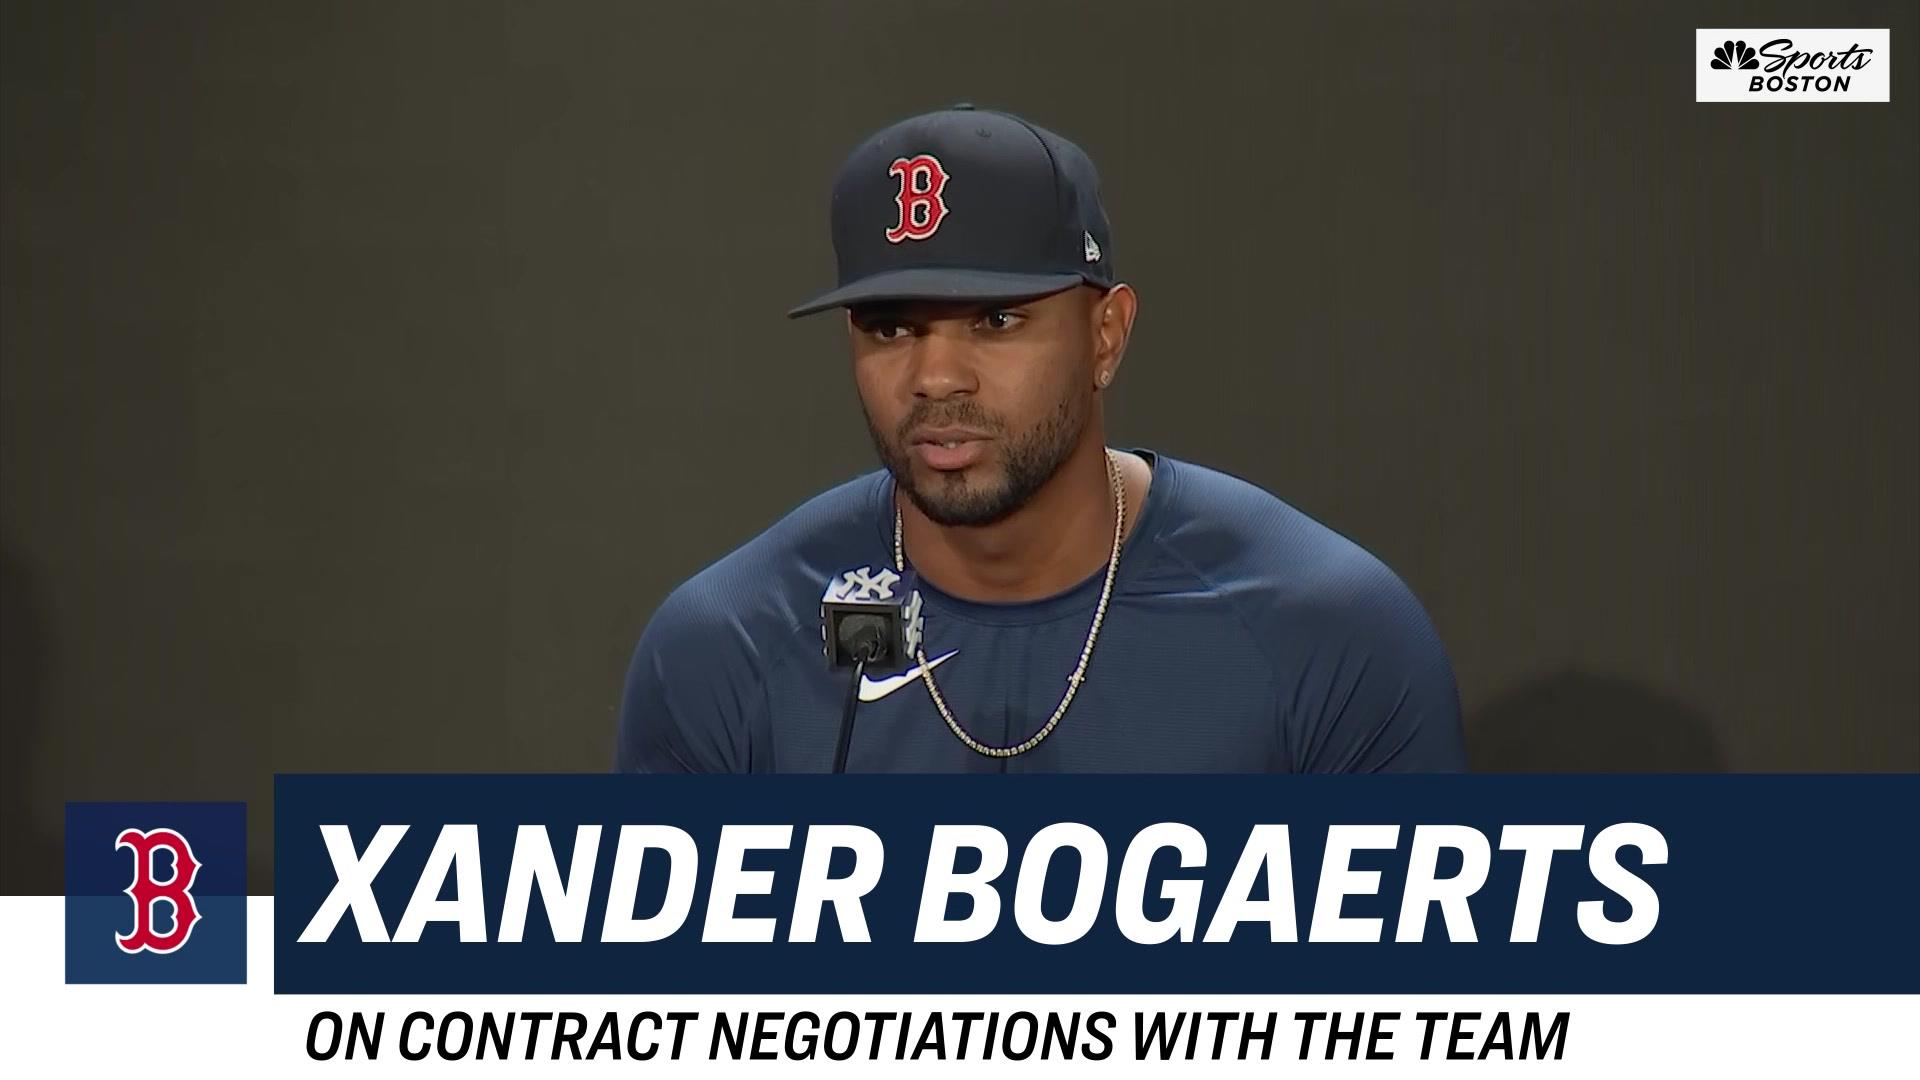 Bogaerts on contract offer from Red Sox: “They offered, it didn't